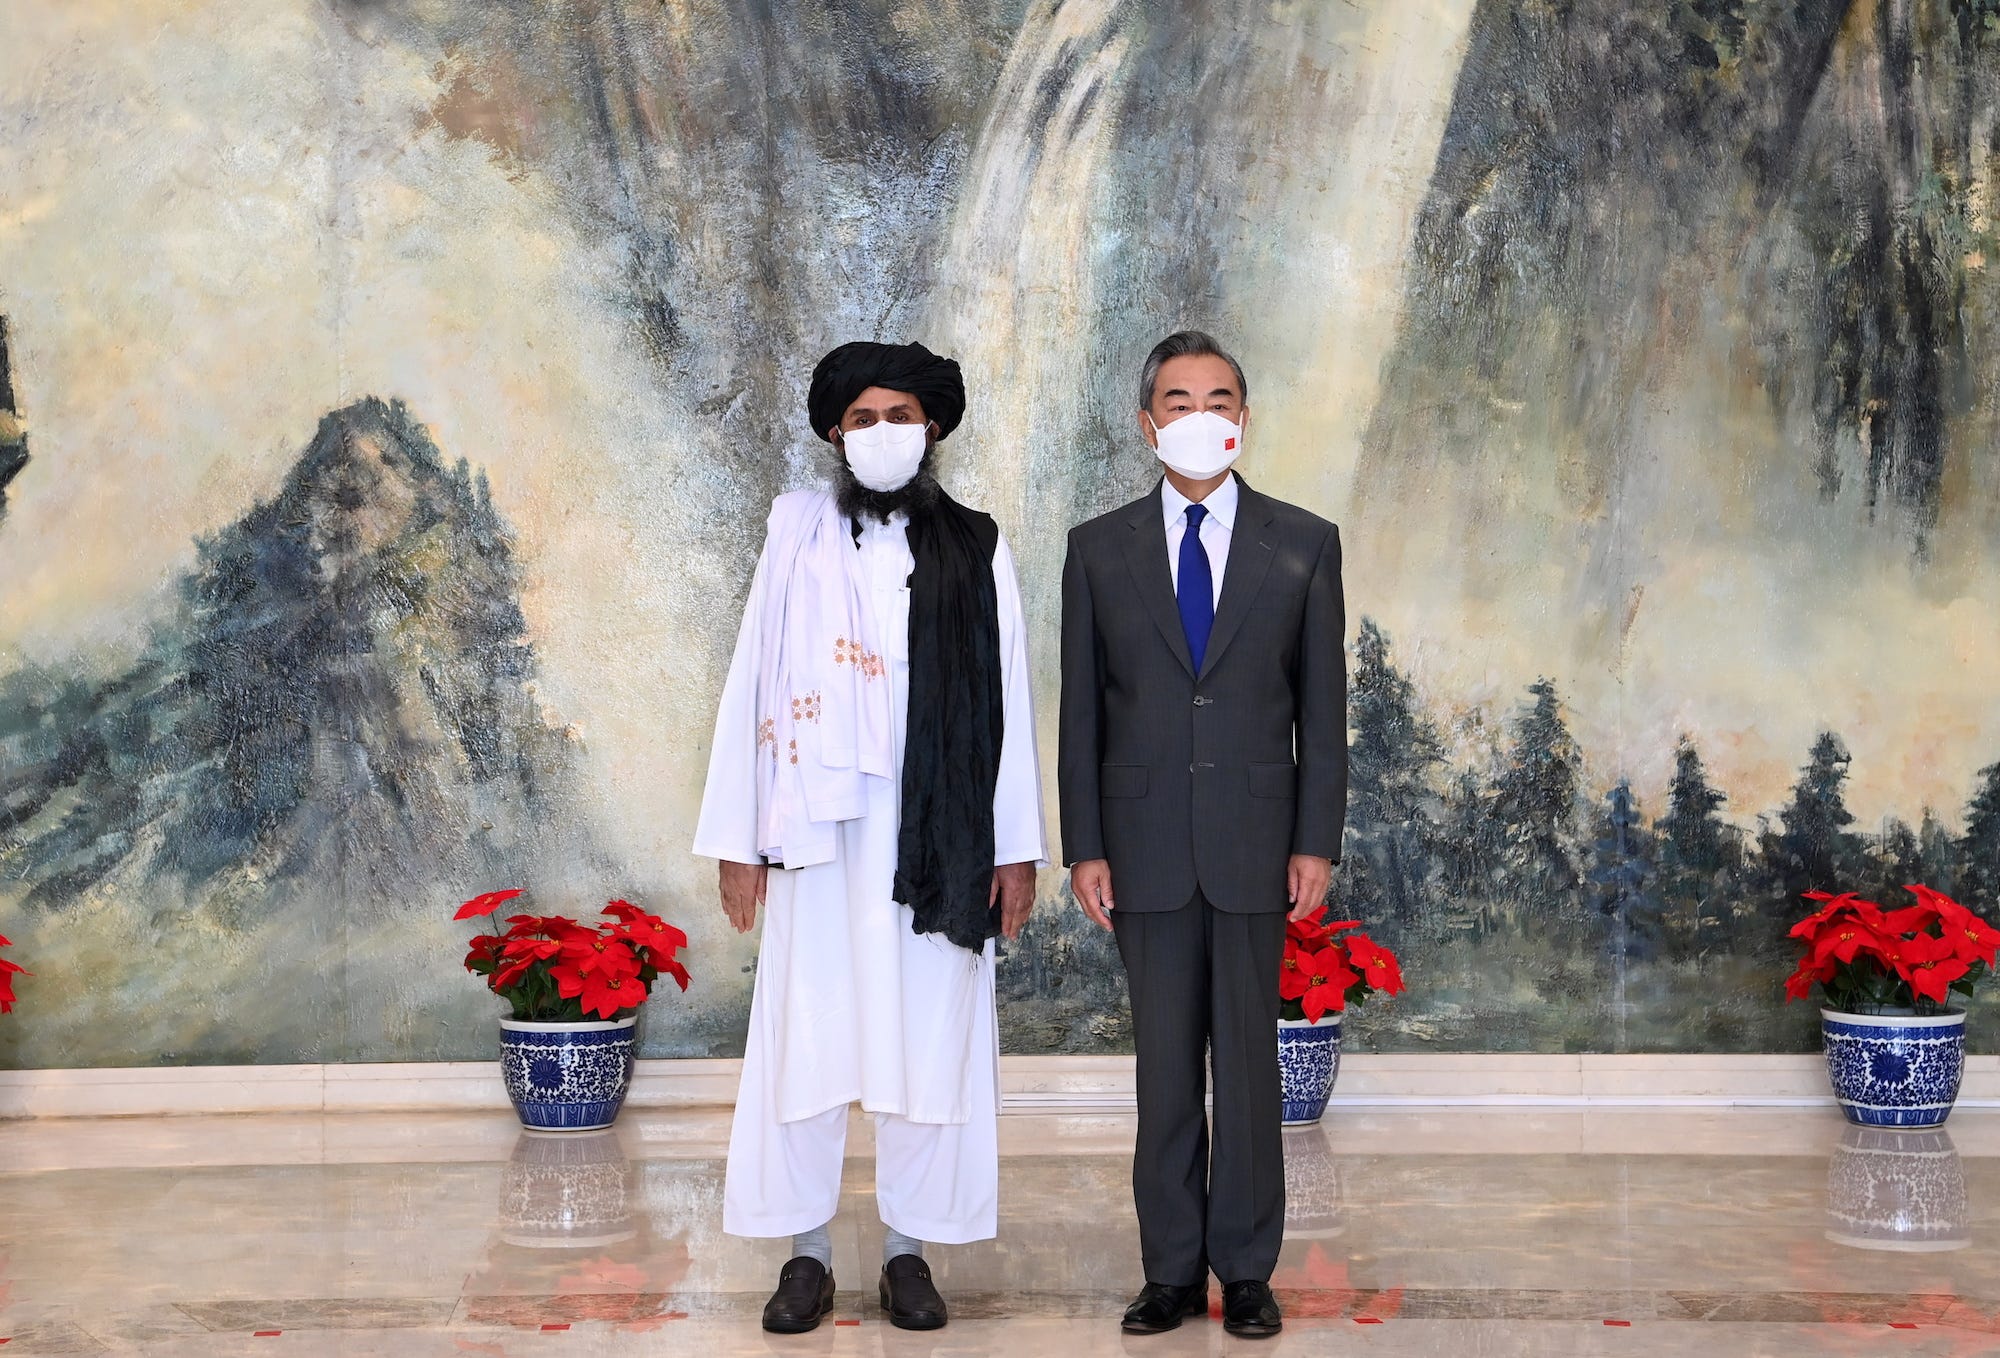 Taliban meeting with Chinese foreign minister Wang Yi